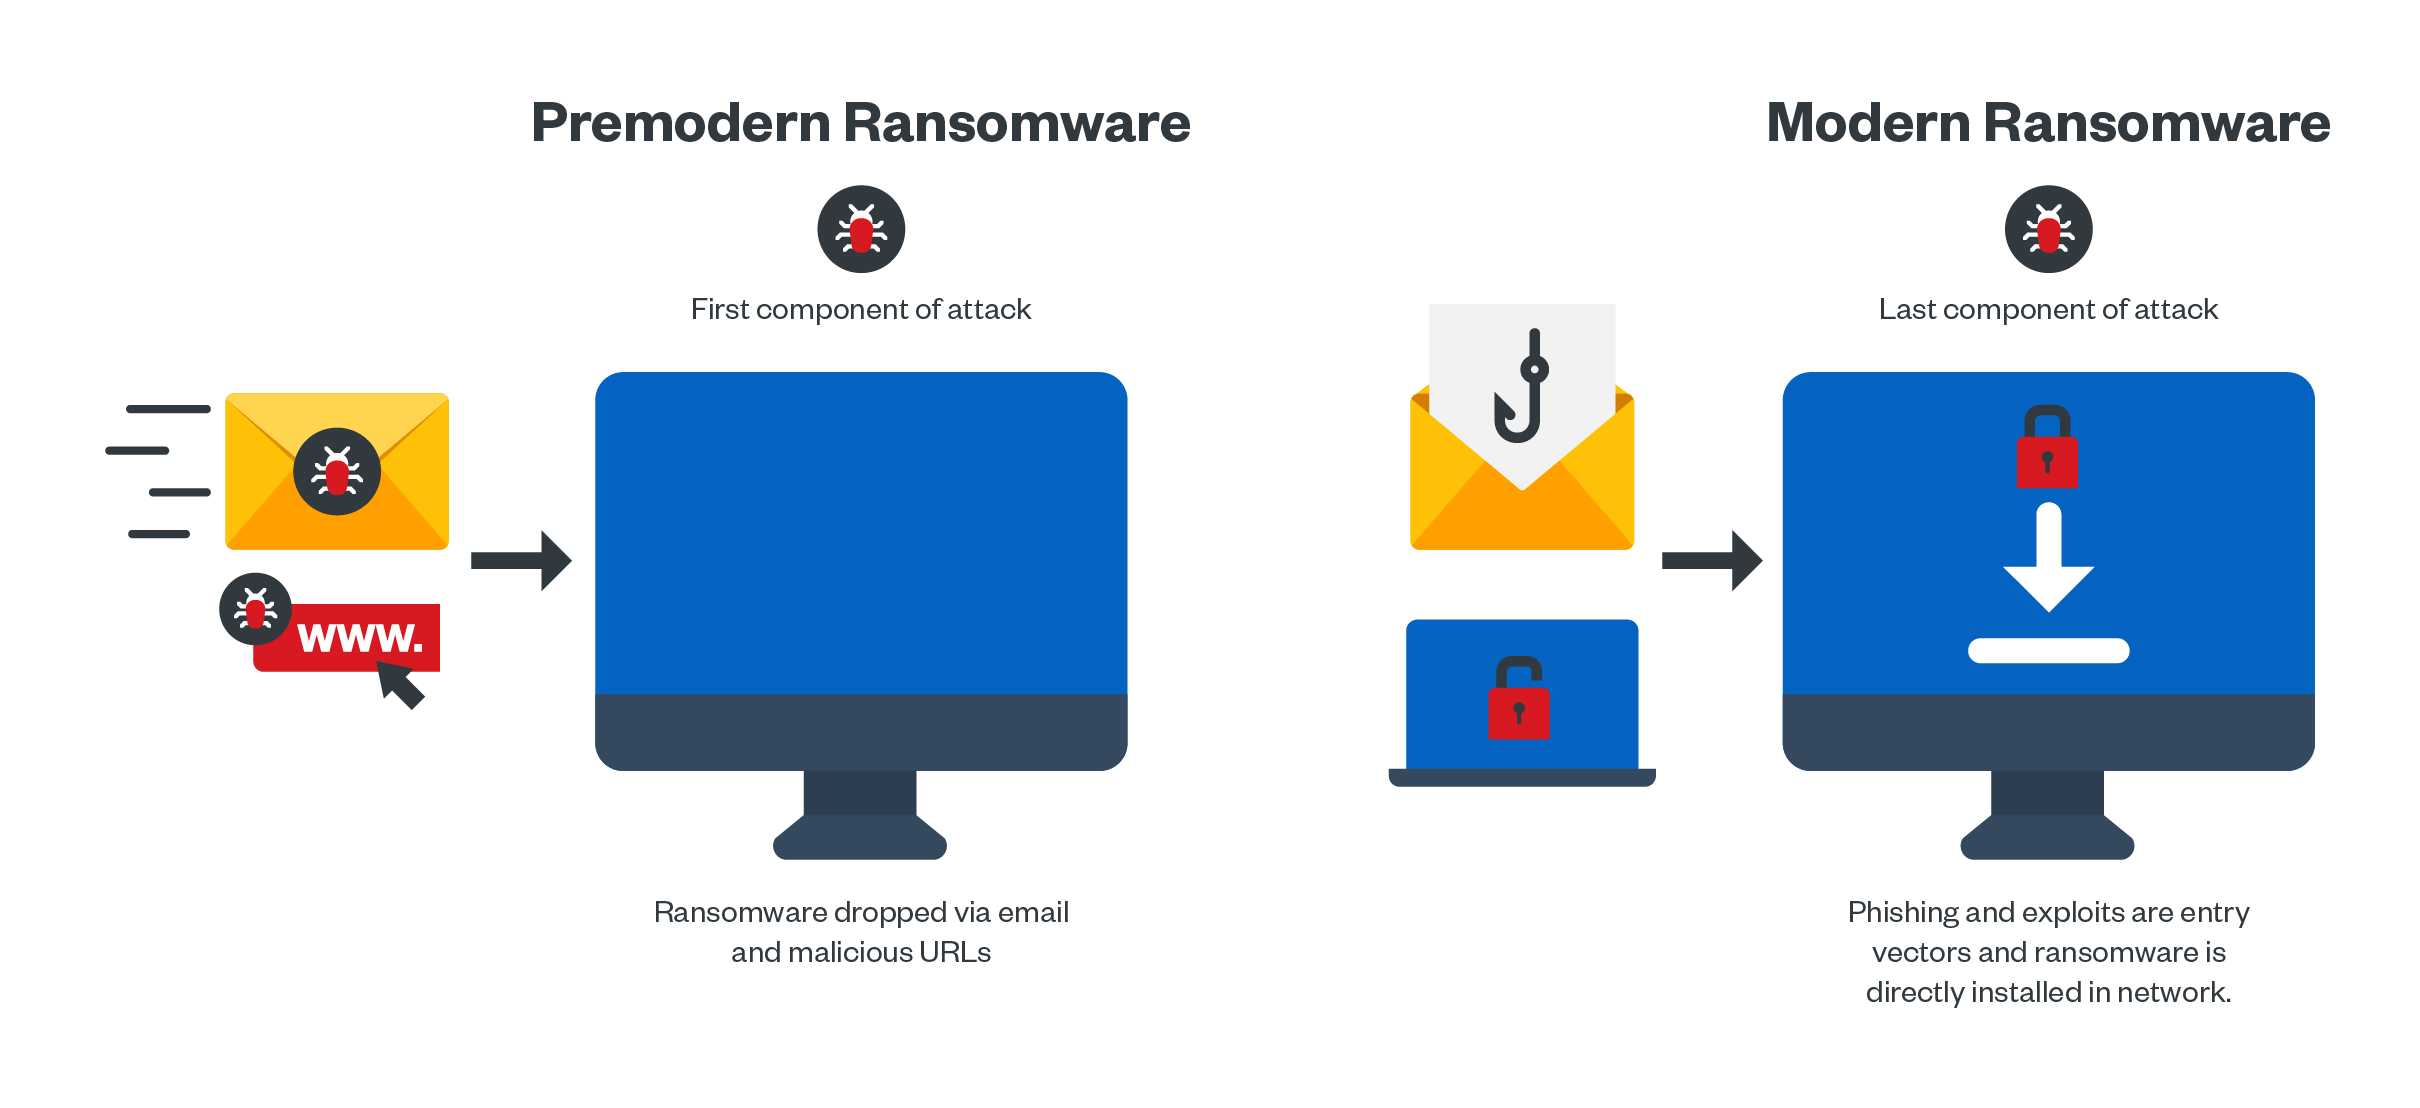 Figure 1. The differences in modern and premodern ransomware